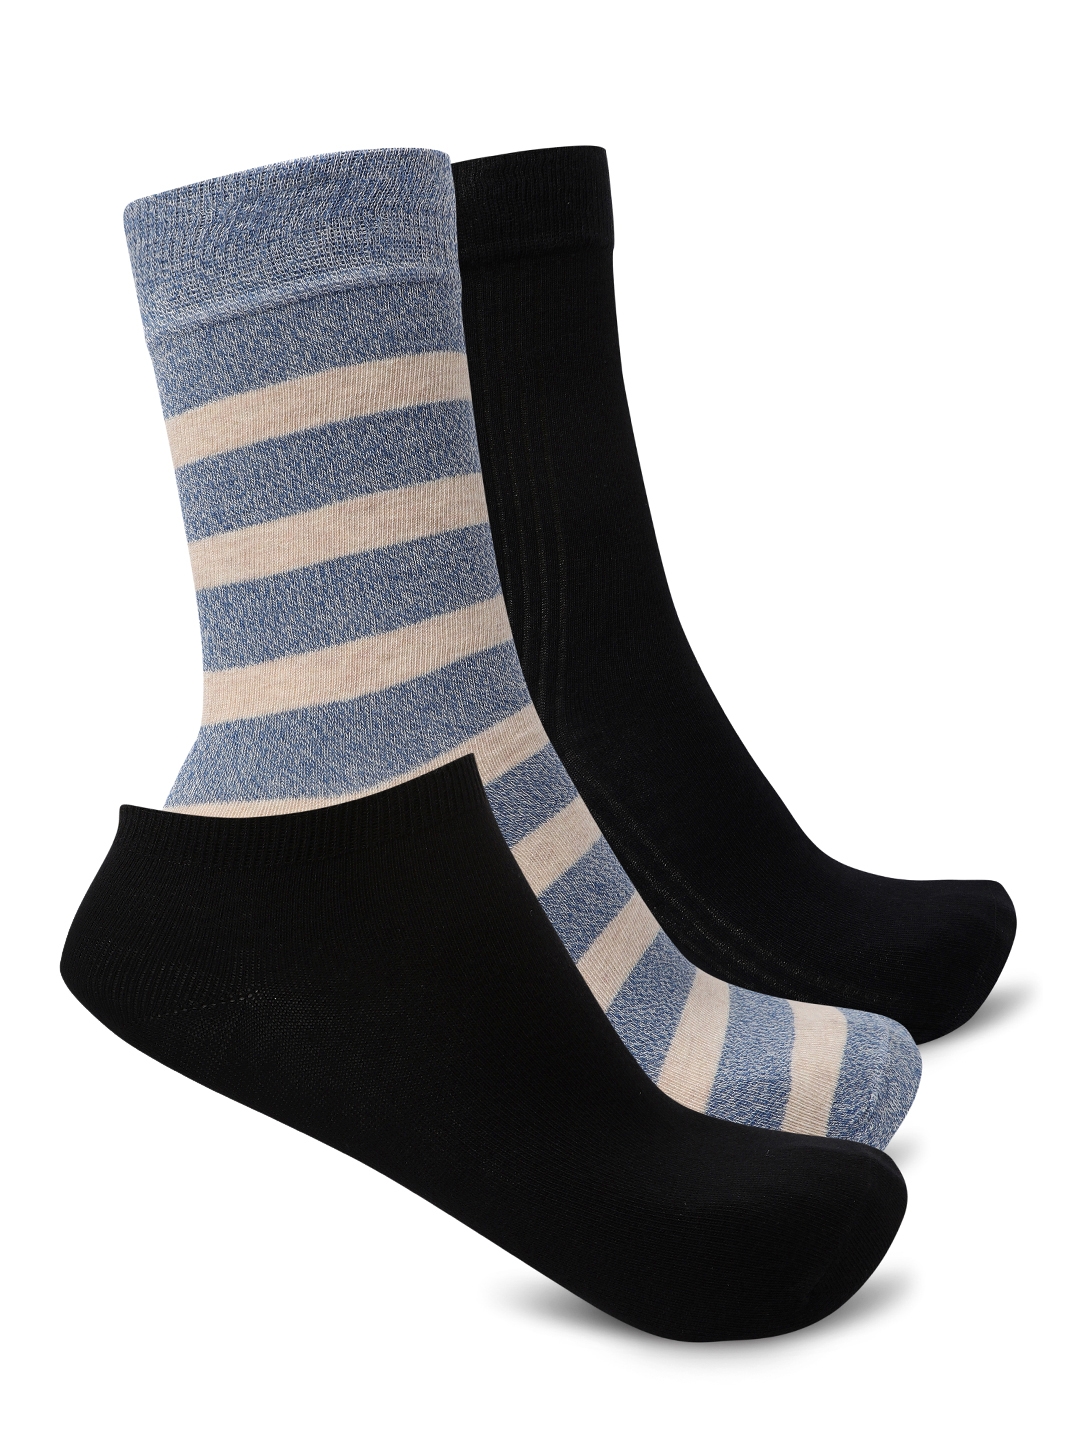 Smarty Pants | Smarty Pants men's pack of 3 solid and printed cotton socks. 